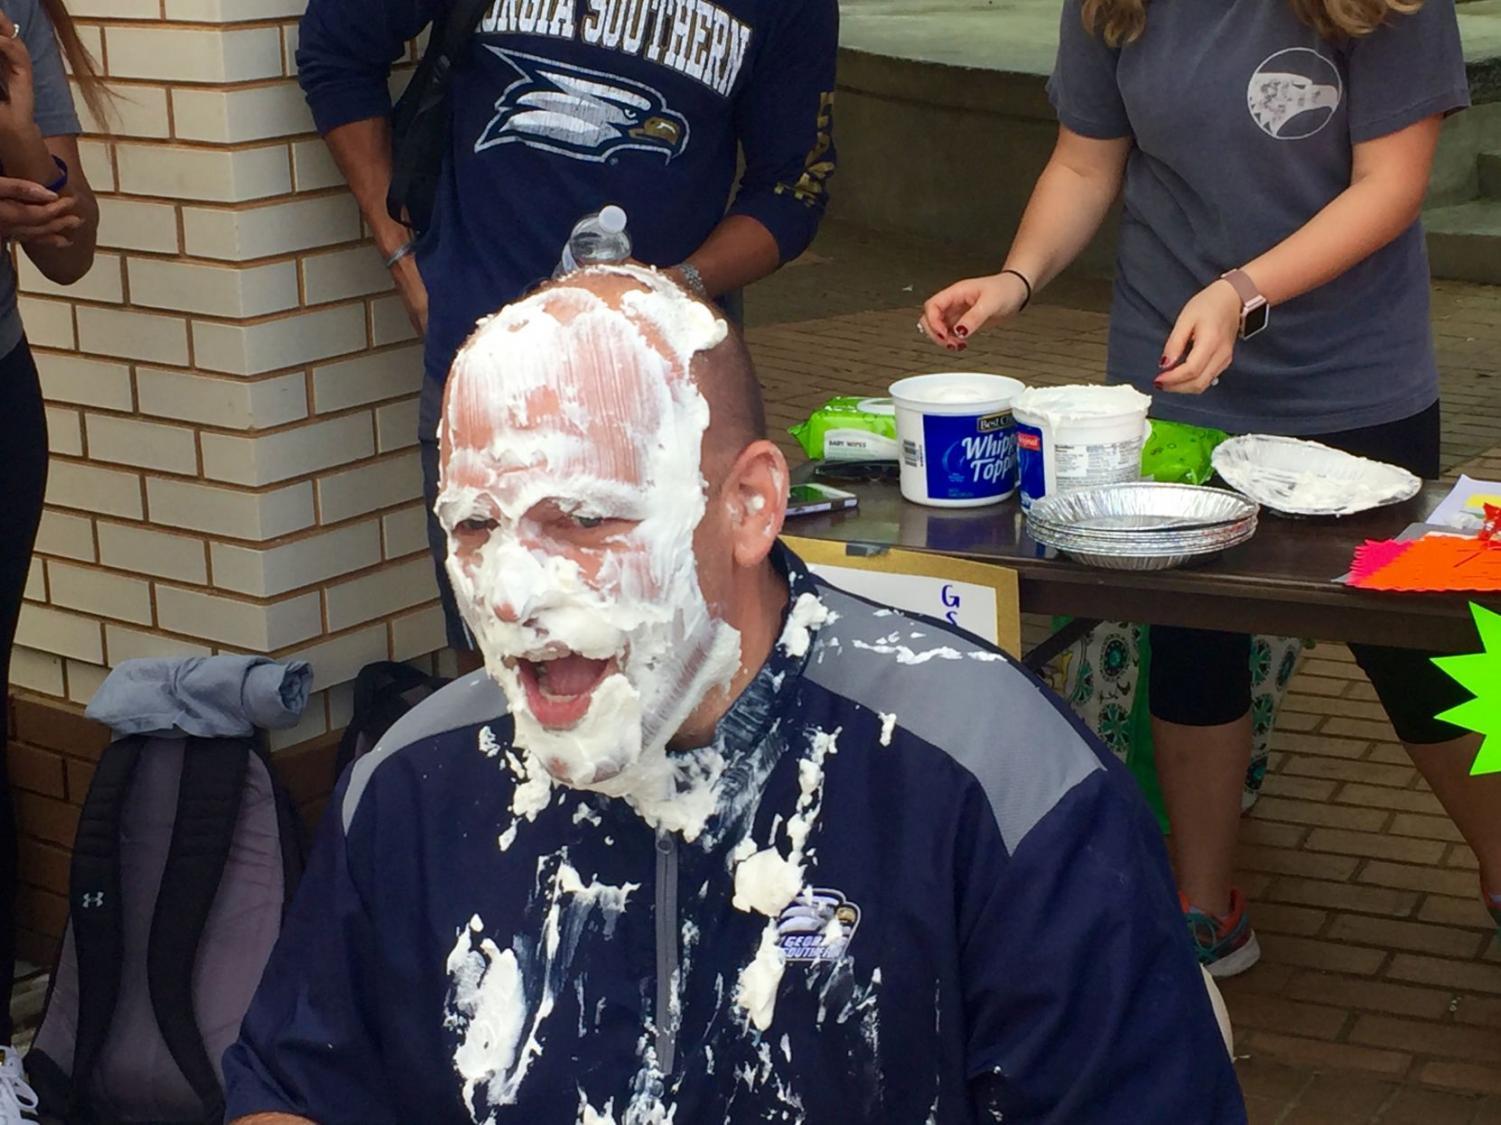 Lunsford+gets+pied+in+the+face+for+fundraising+event